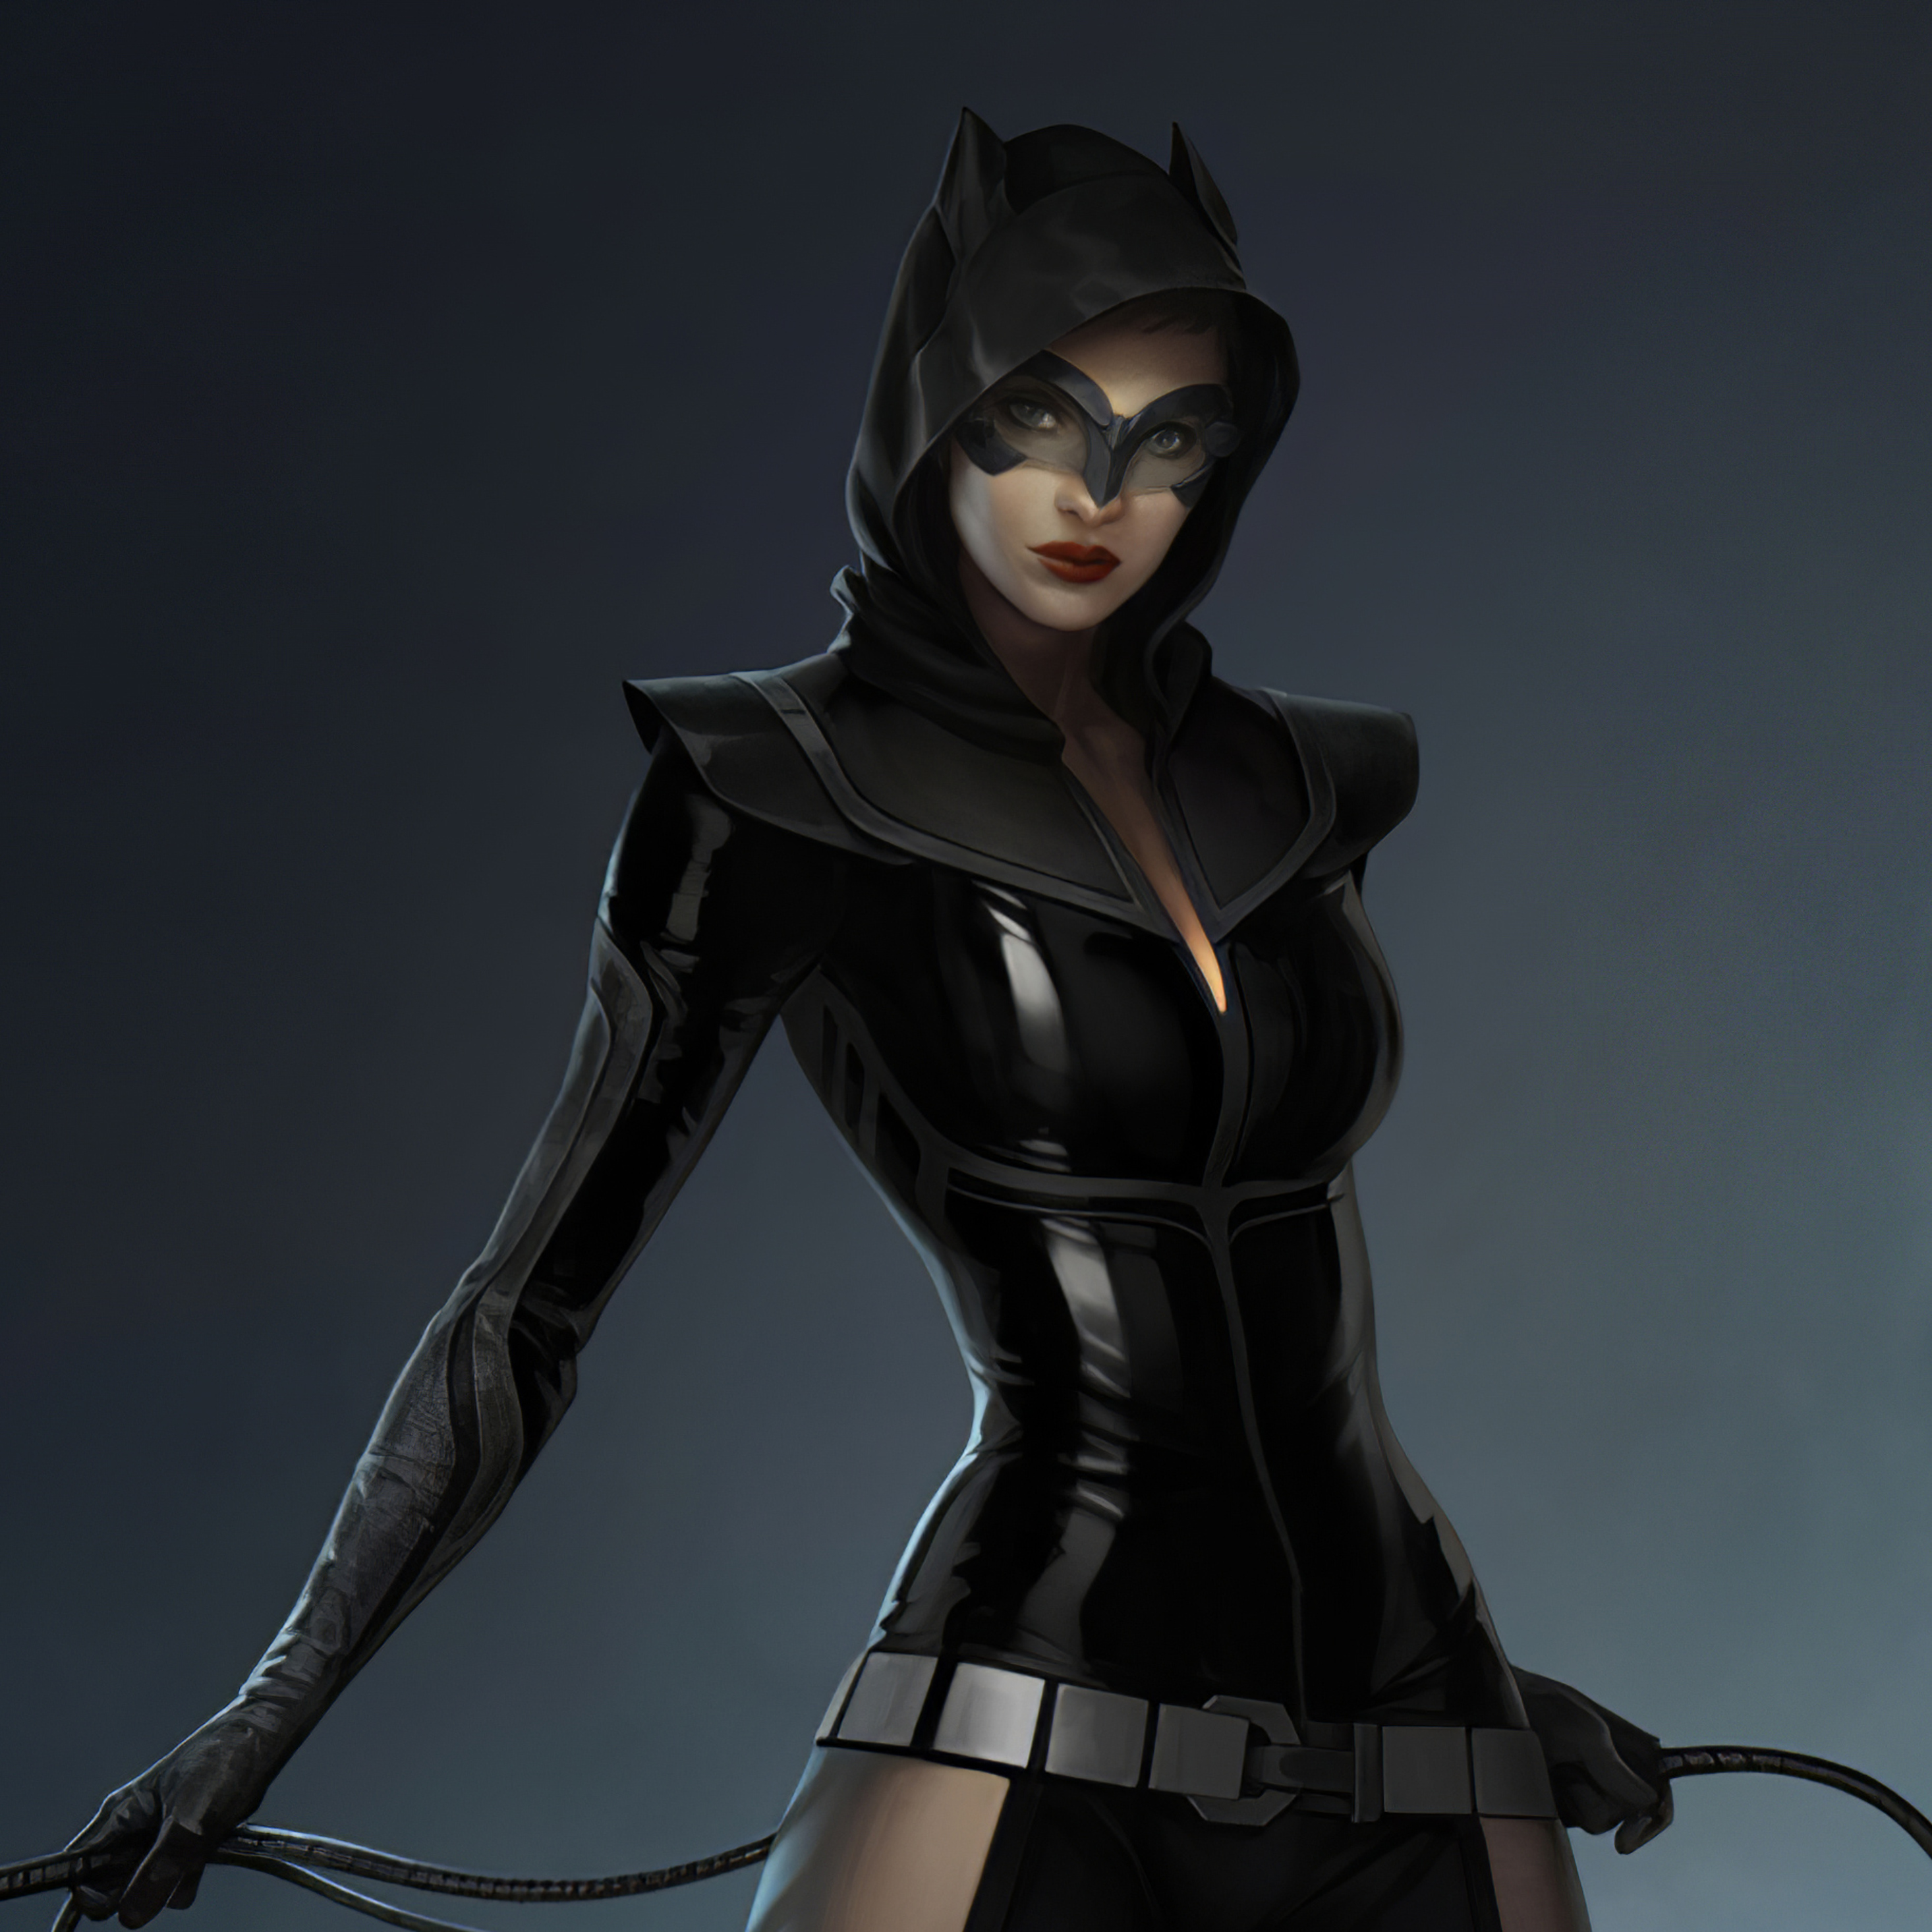 Catwoman Injustice 2 Game 4k In 2932x2932 Resolution. catwoman-injustice-2...